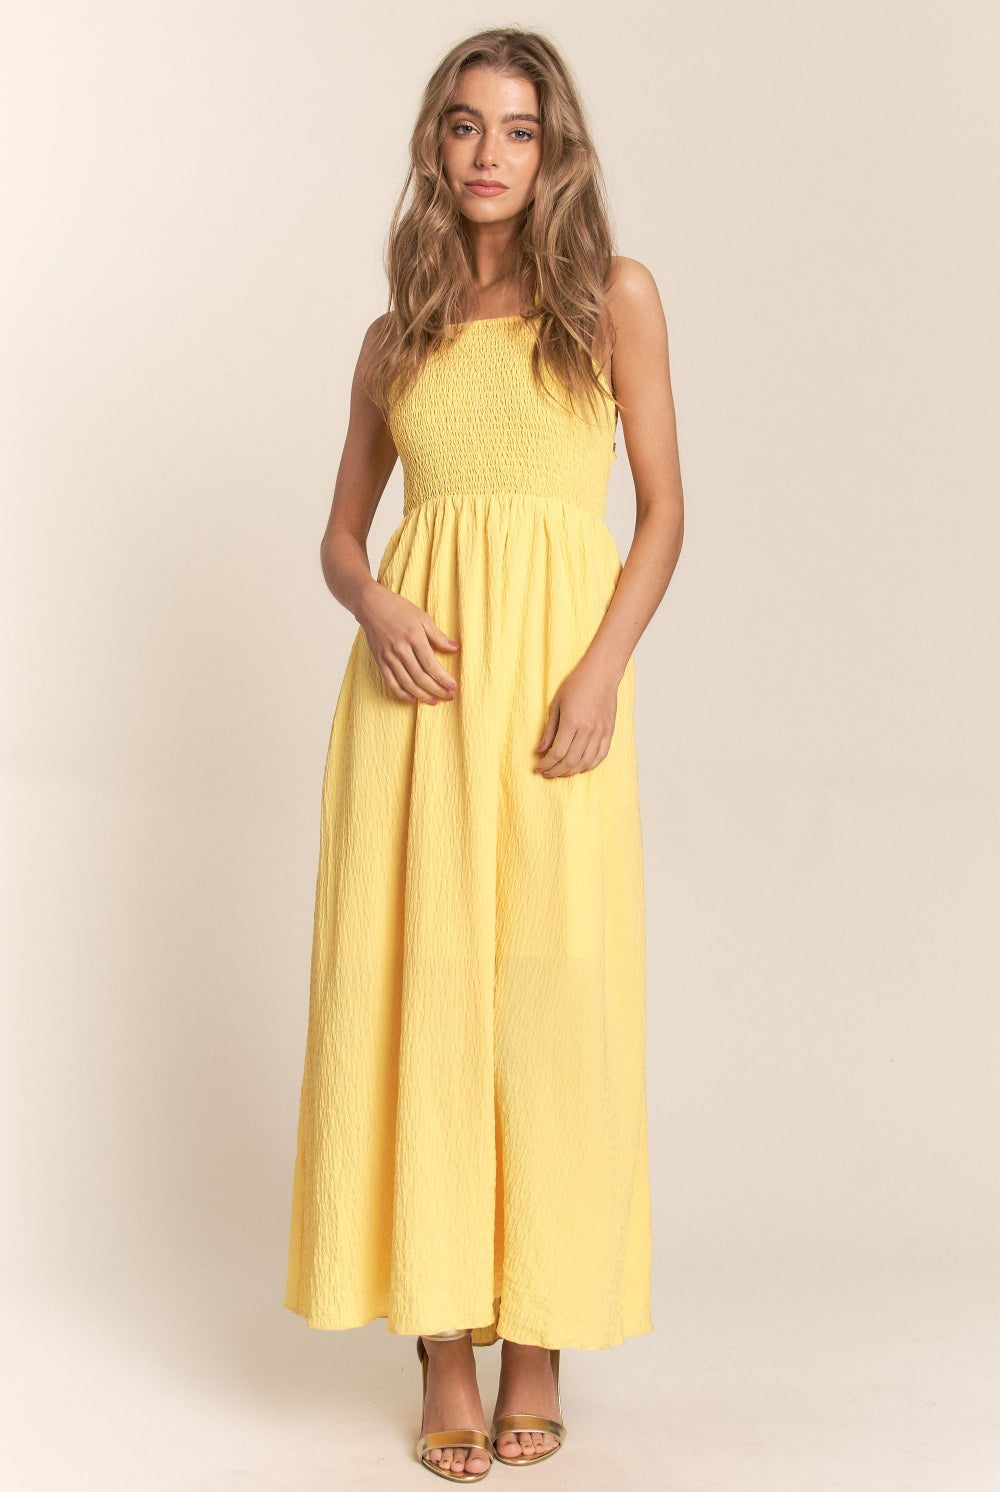 A woman glances over her shoulder, wearing a sunny yellow maxi dress with a unique ruffle detail running asymmetrically across the back. The dress ties at the lower back, creating an elegant bow that enhances the feminine silhouette. Its crinkled texture adds a bohemian flair to the design, perfect for summer days or a tropical getaway.